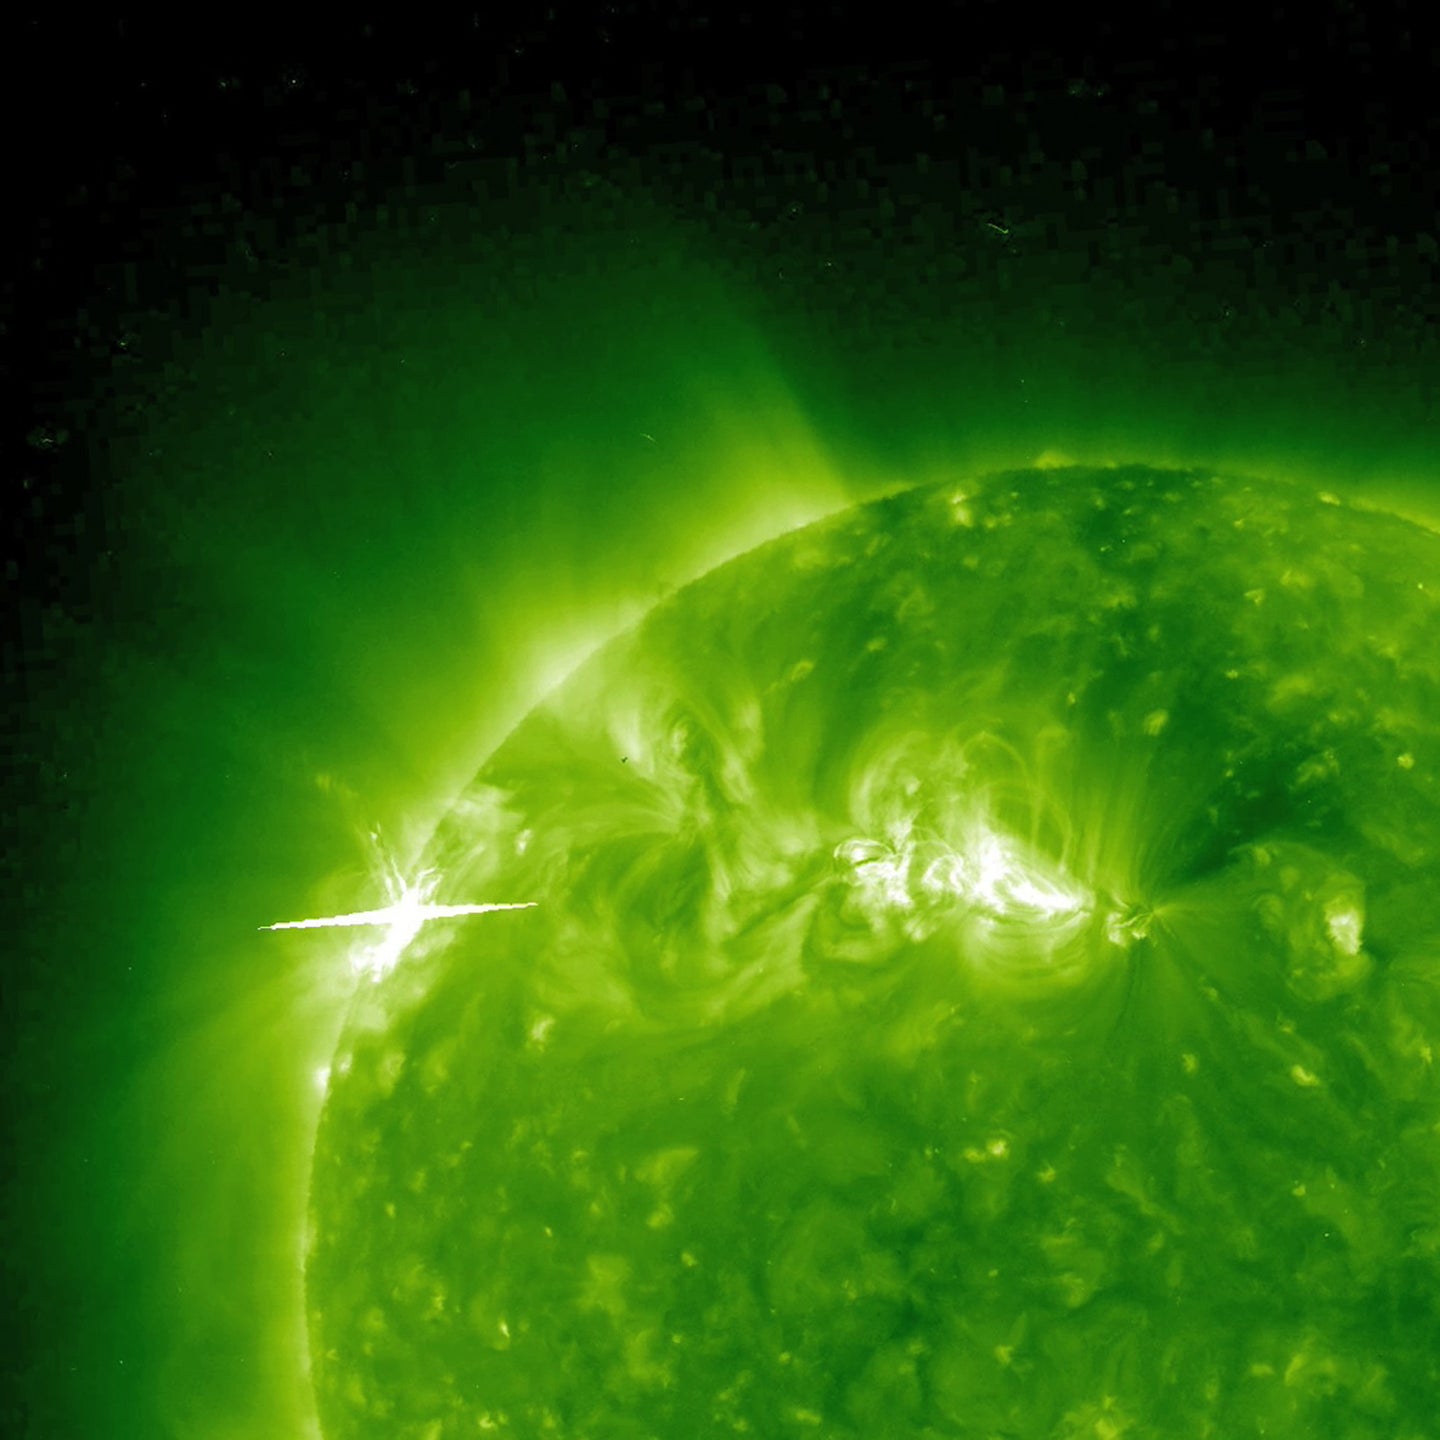 Space Weather Is Worsening; Could Mean Risk for Astronauts and Delay Manned Mars Missions